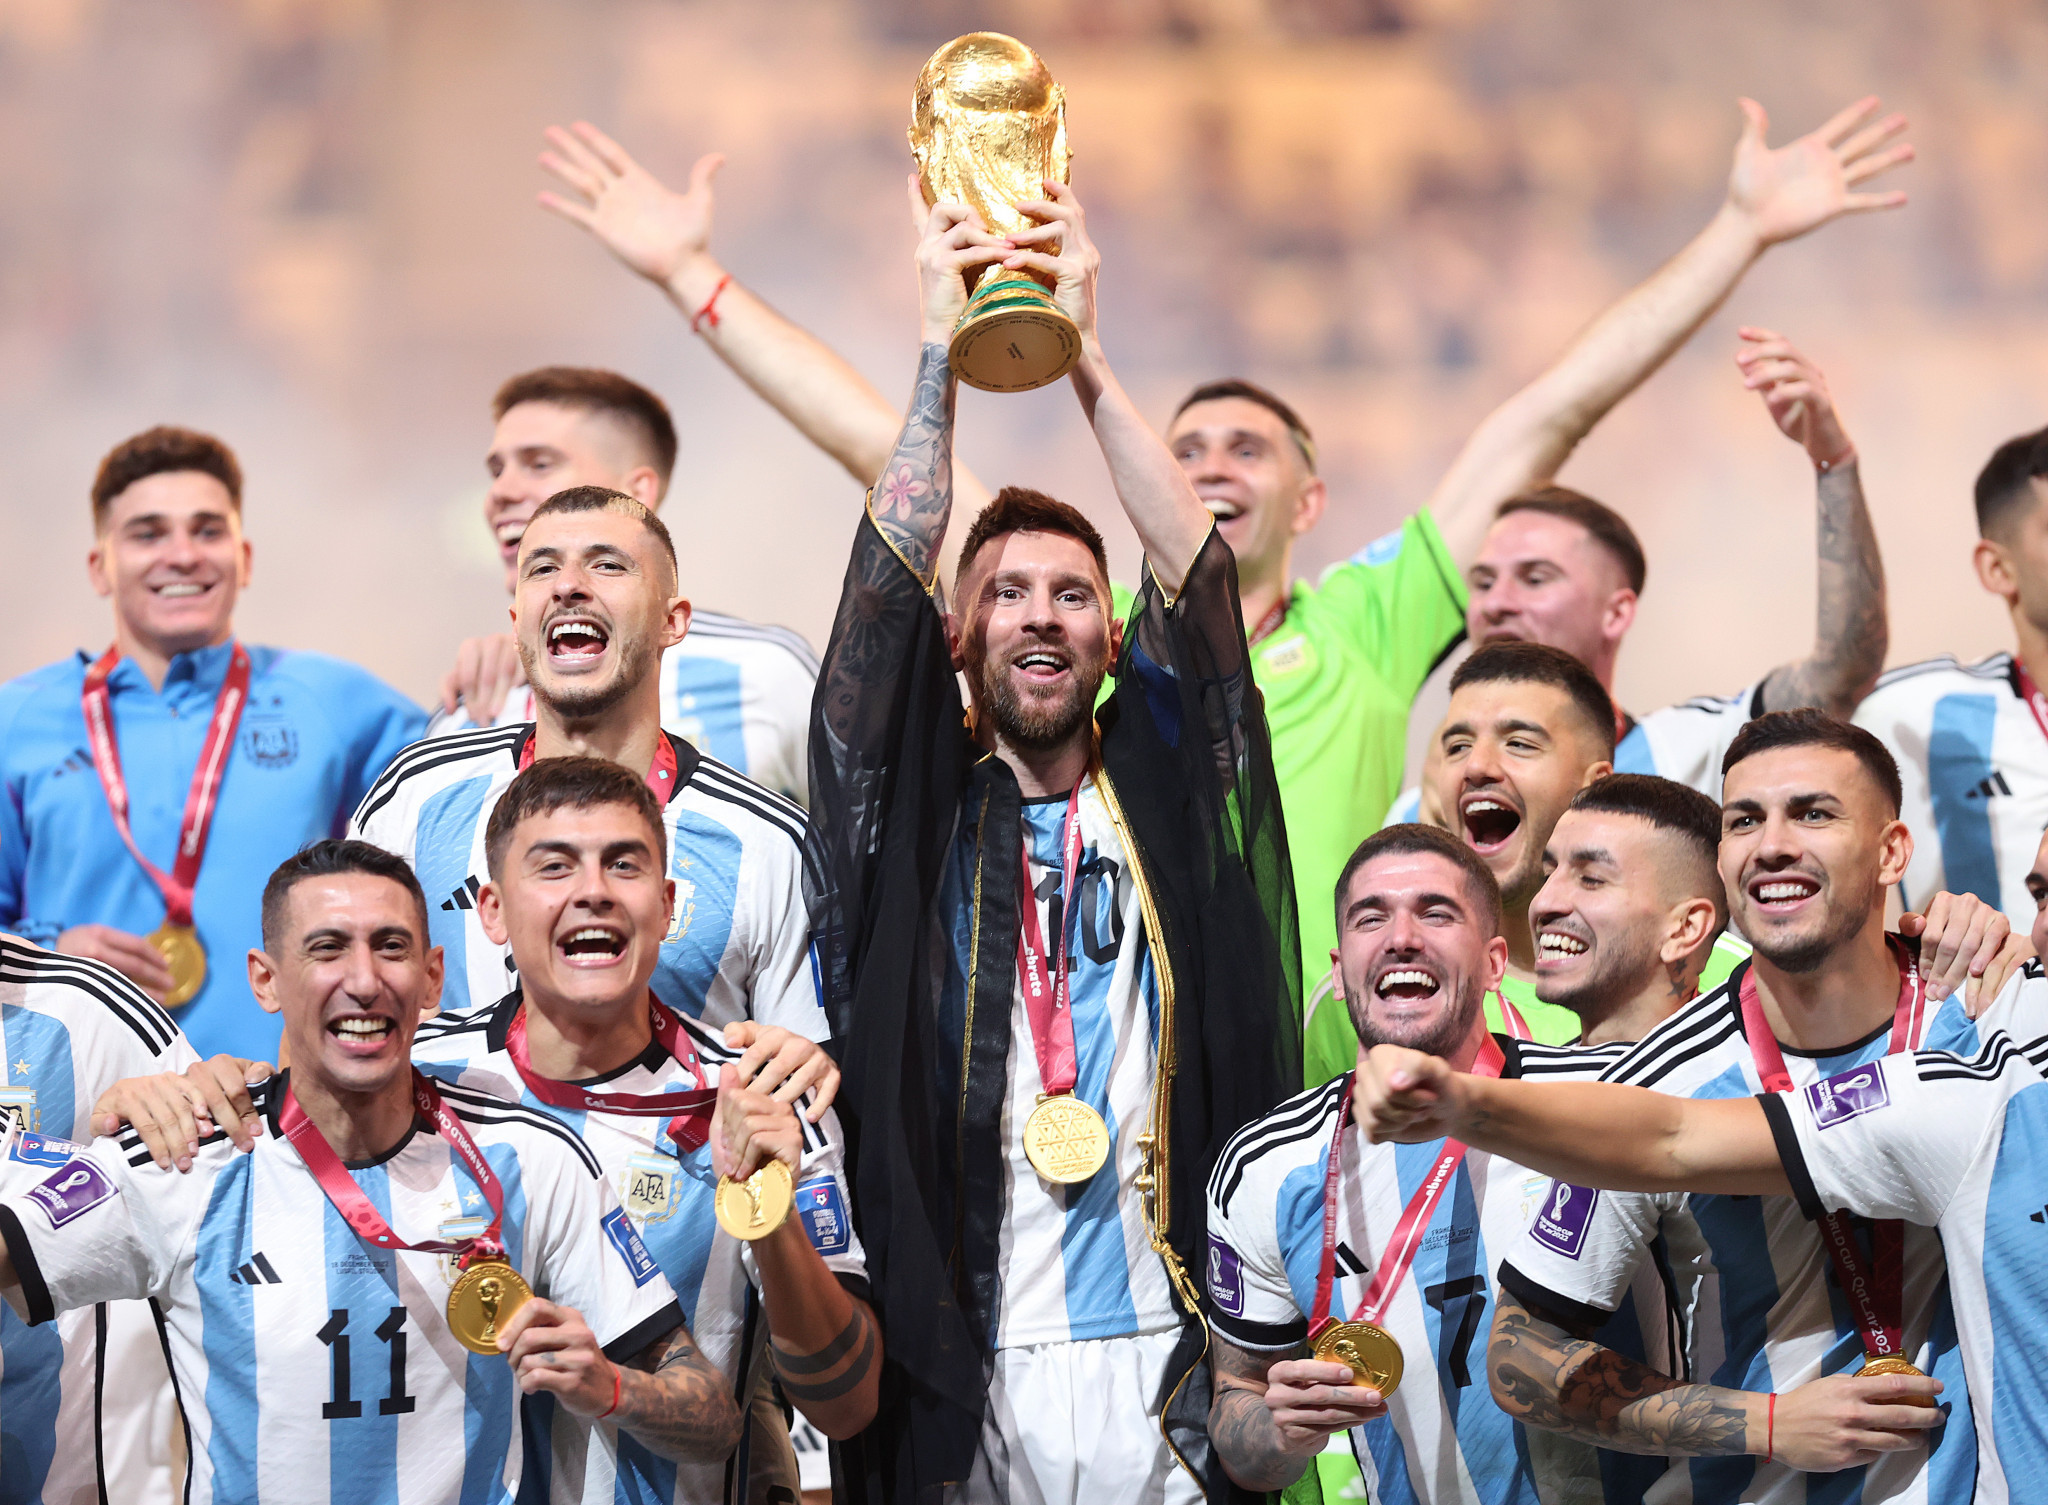 The agreement signed by the FIFA and the ECA  means clubs have committed to following the new International Match Calendar, which includes an expanded FIFA World Cup in 2026 ©Getty Images